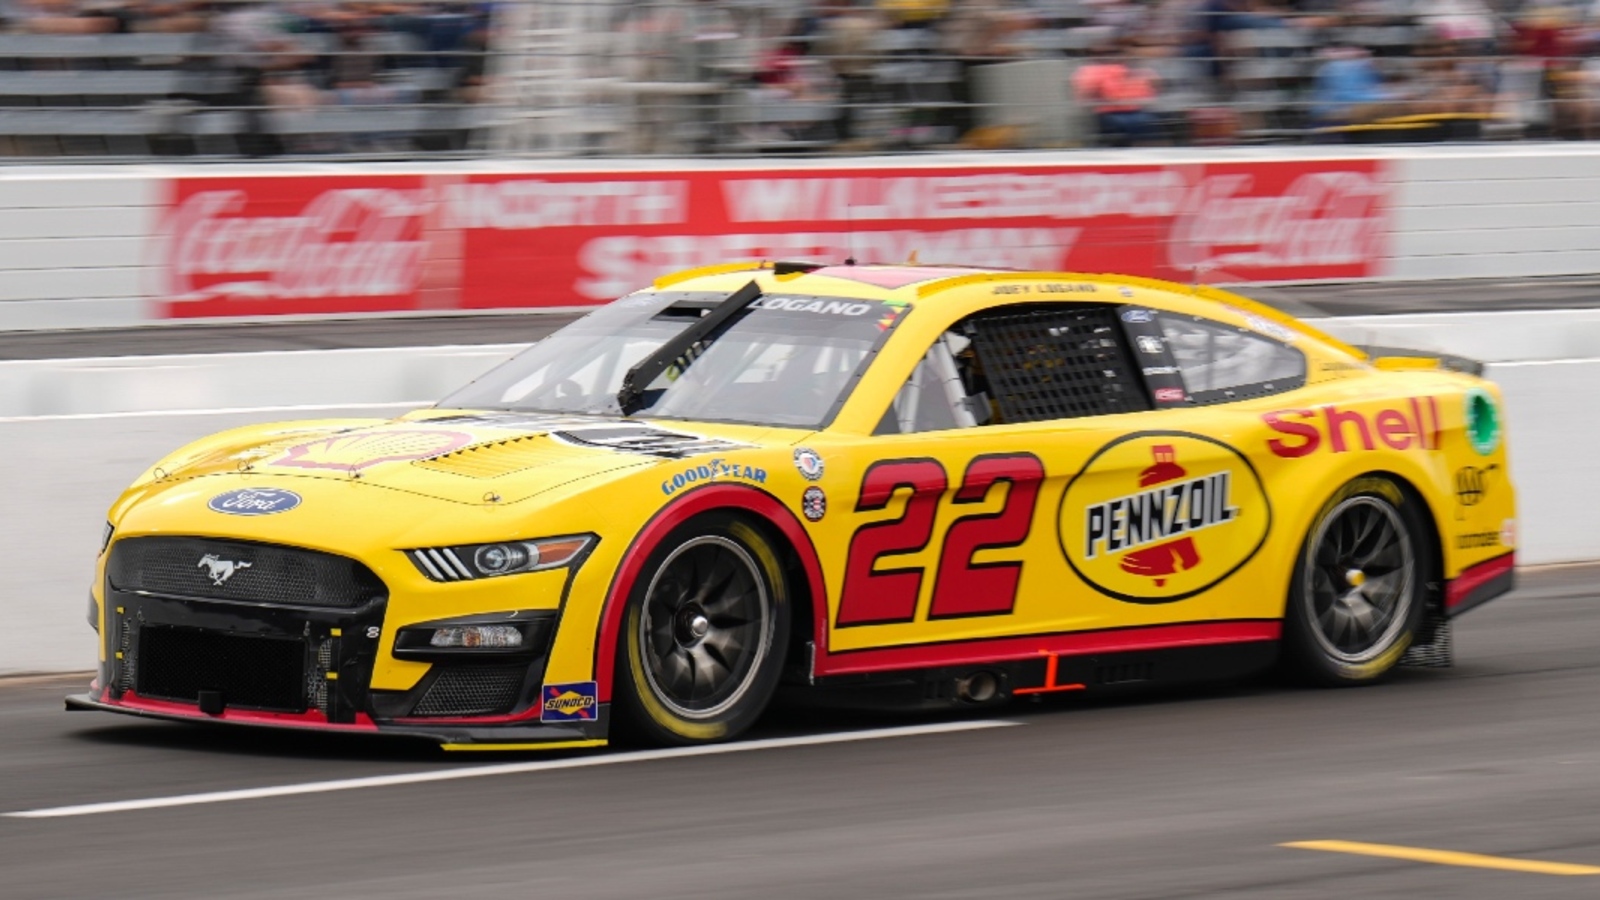 Joey Logano claims $1,000,000 prize, wins All-Star Race at North Wilkesboro